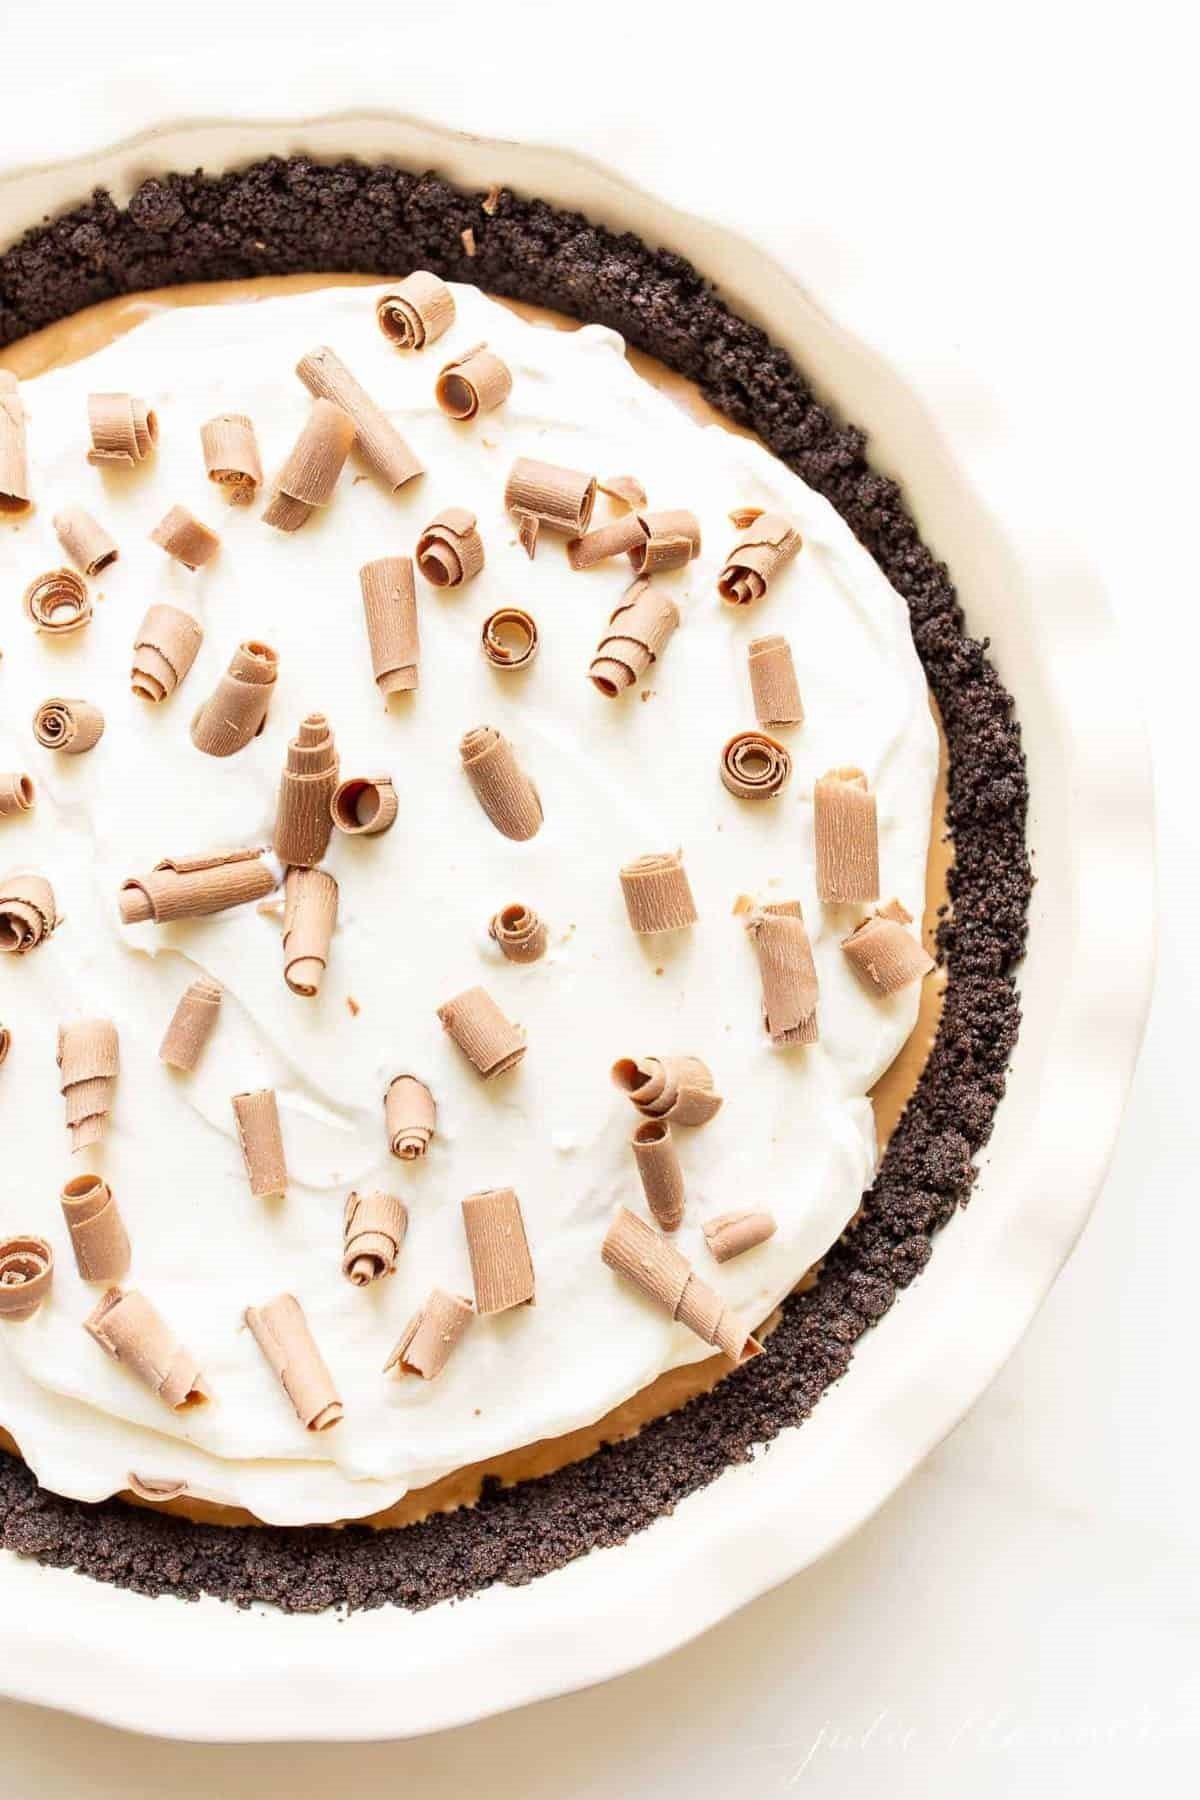 A French silk pie on a marble countertop.